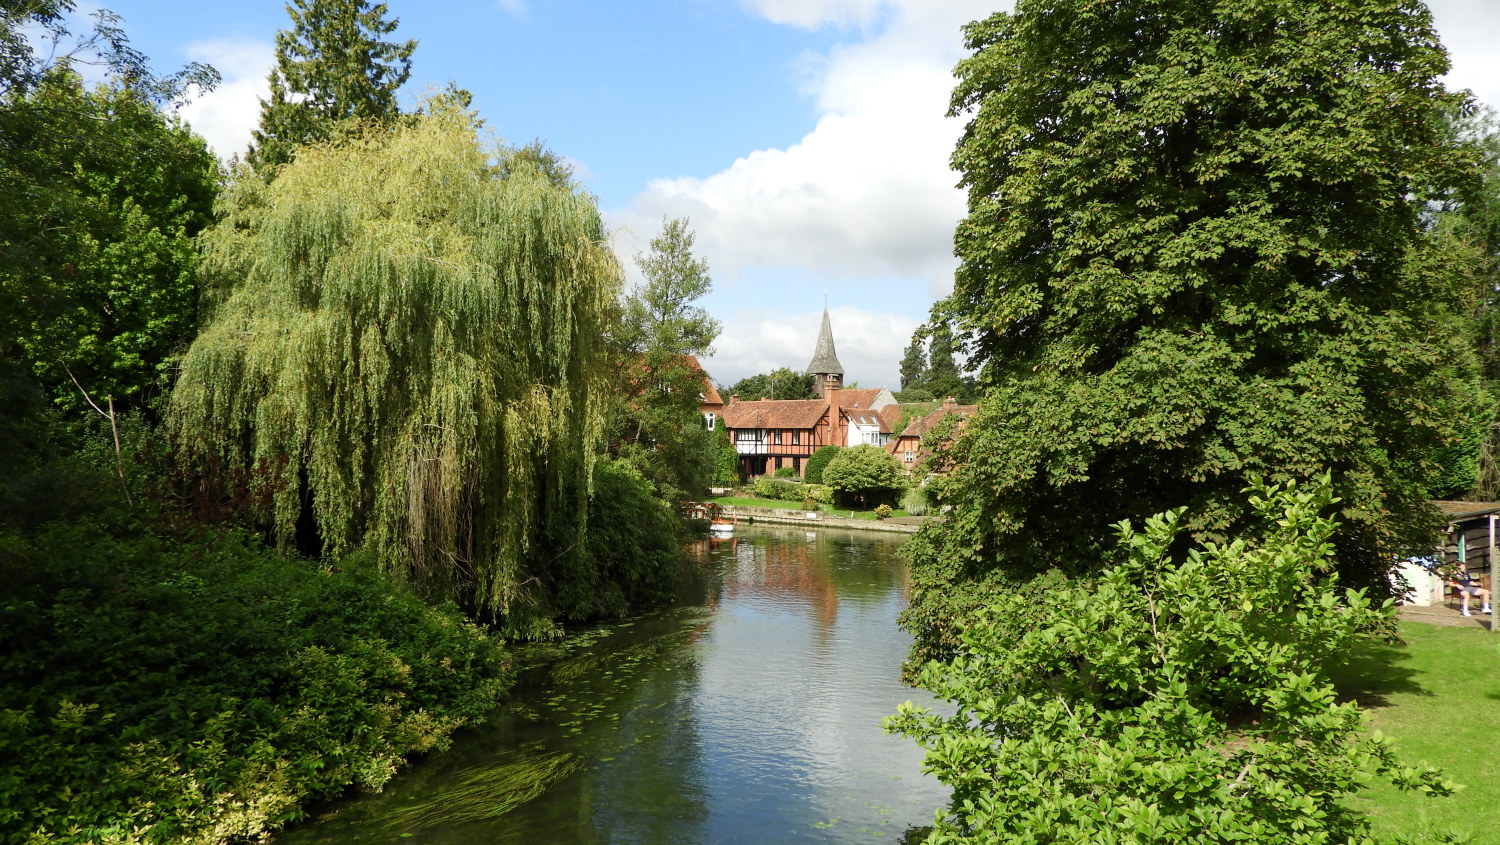 Whitchurch-on-Thames